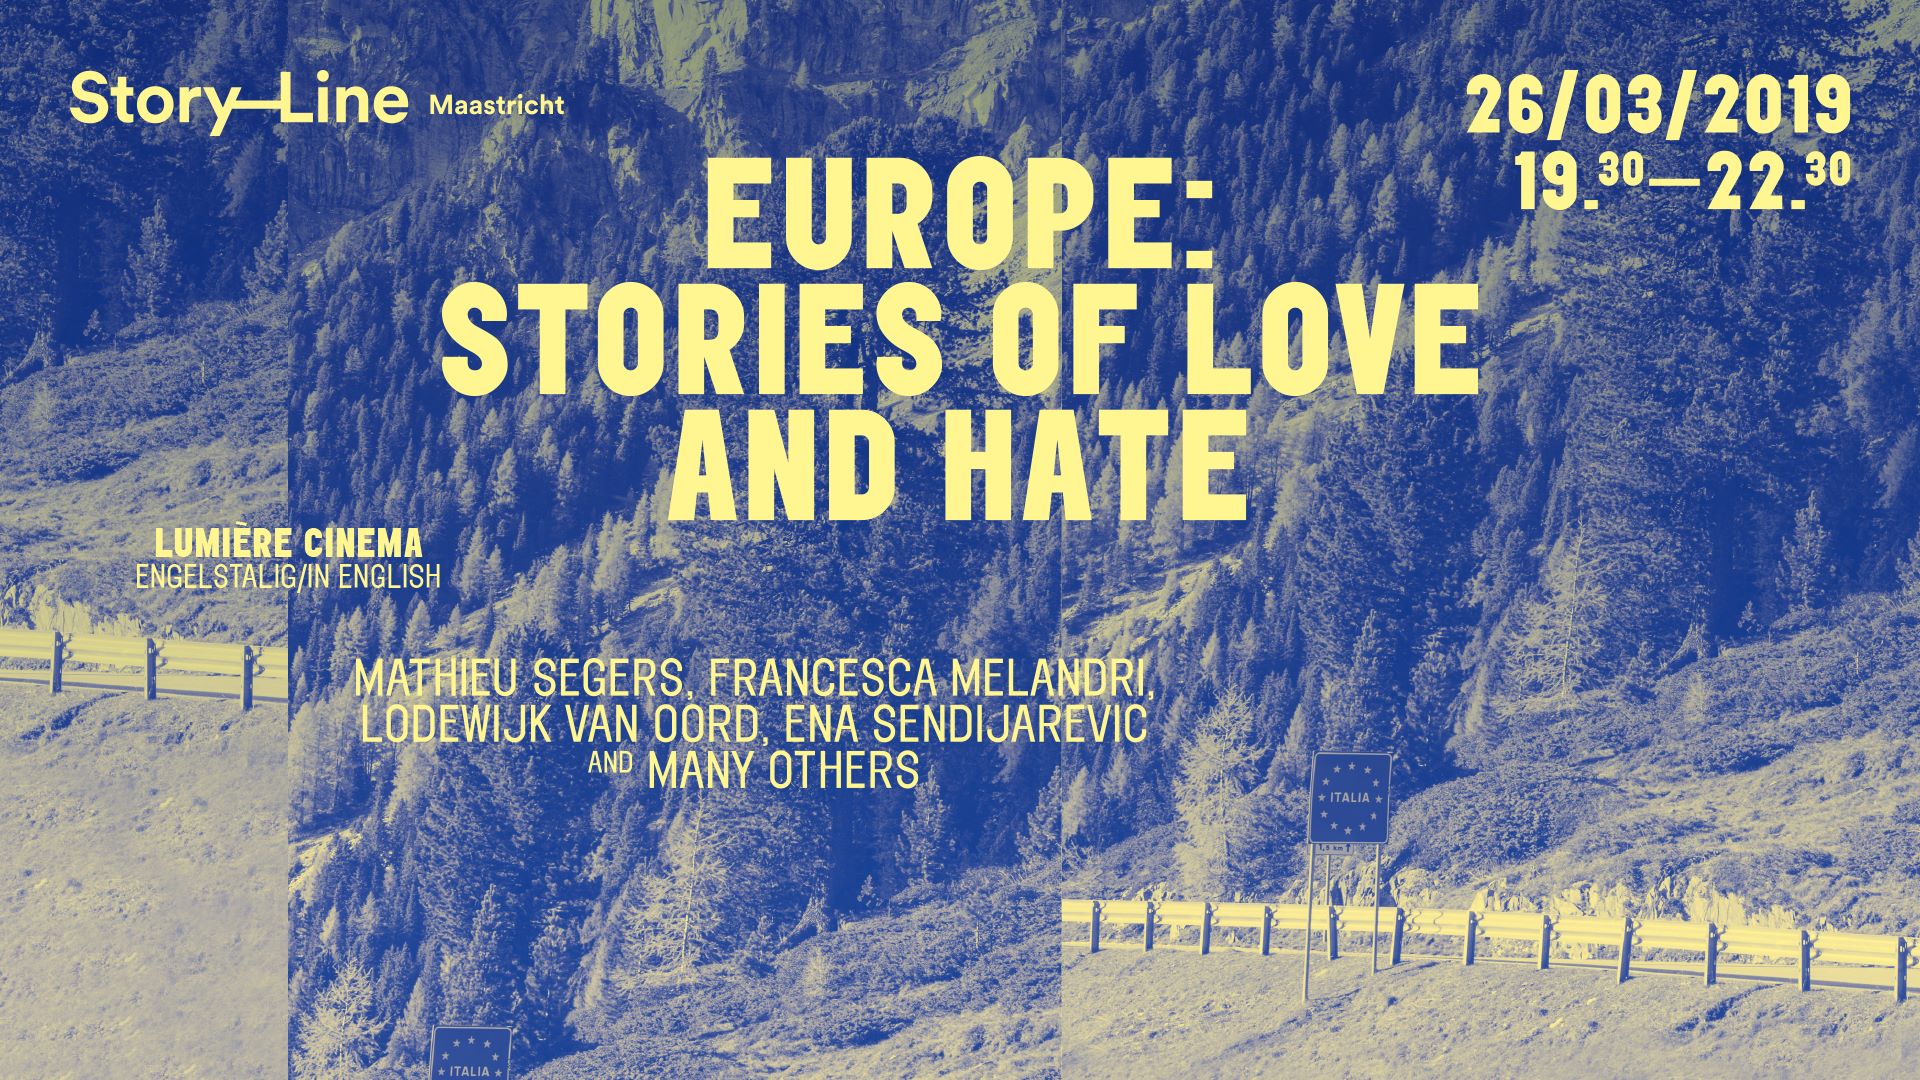 Europe stories of love and hate